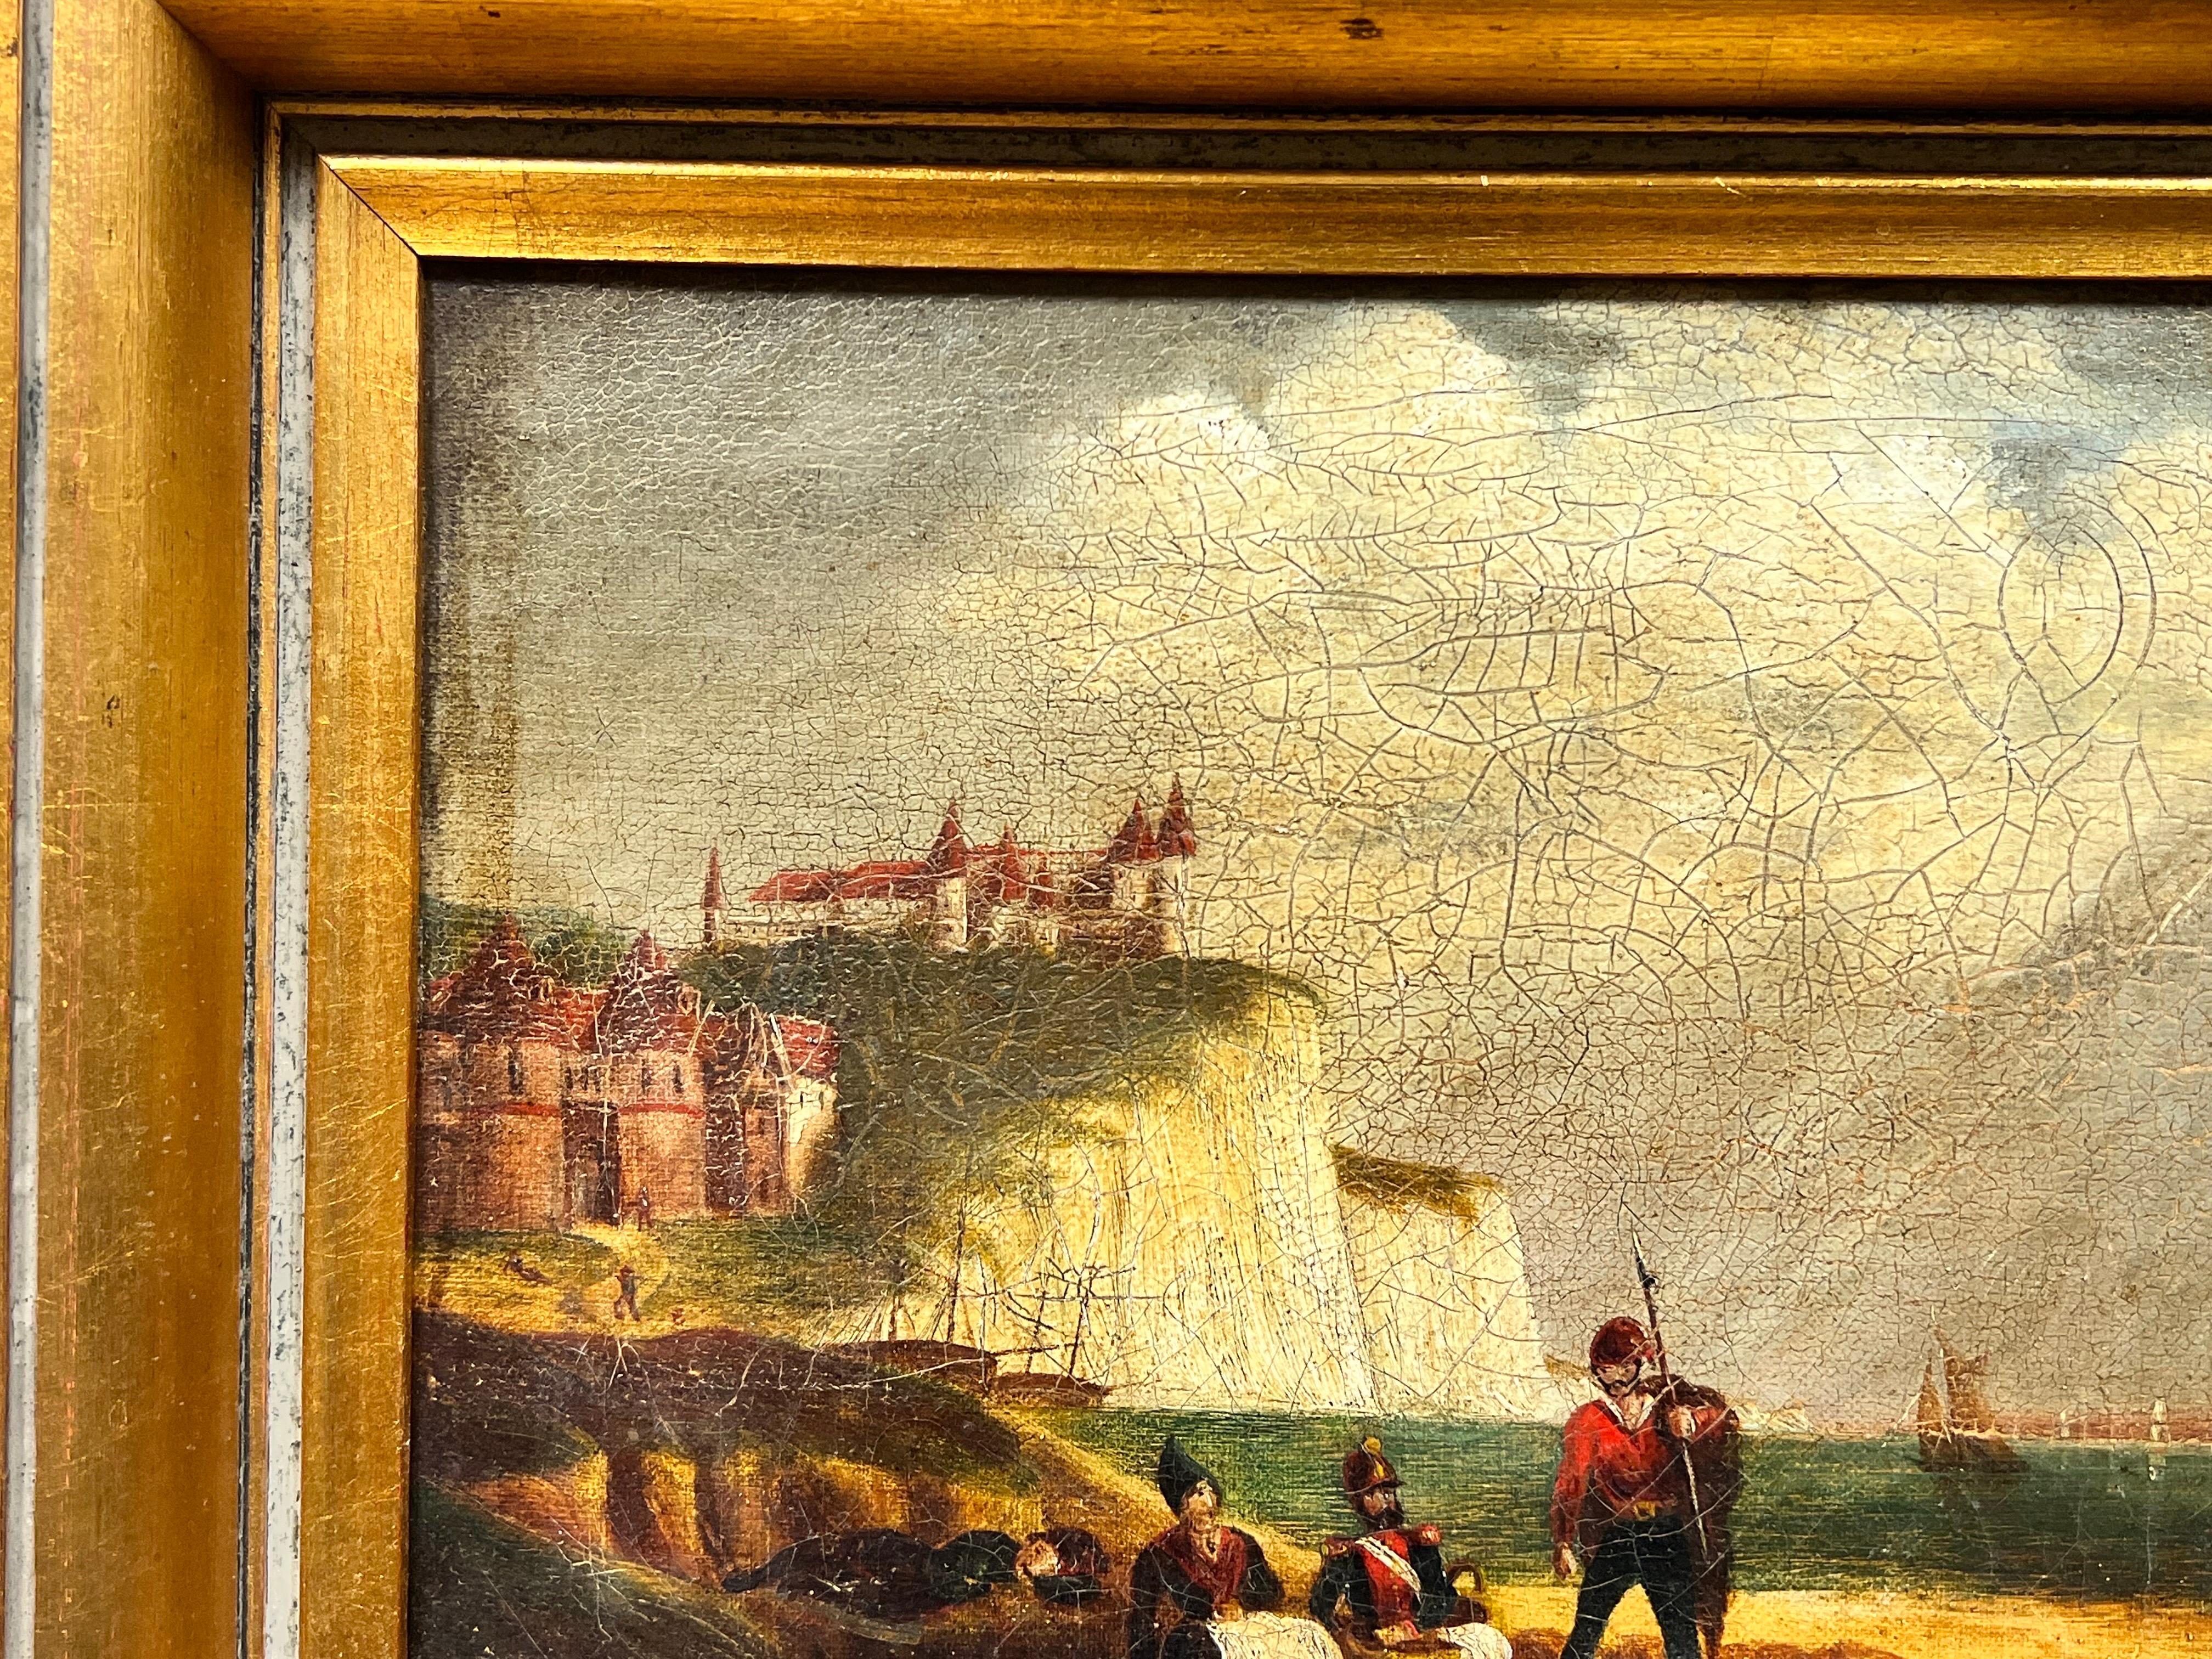 English School, circa 1800
Napoleonic Wars Period marine scene with soldiers on a French beach. 
oil on canvas, framed 
framed: 10.5 x 13 inches
canvas: 8 x 10 inches
private collection, UK
condition: The painting is in overall very good and sound